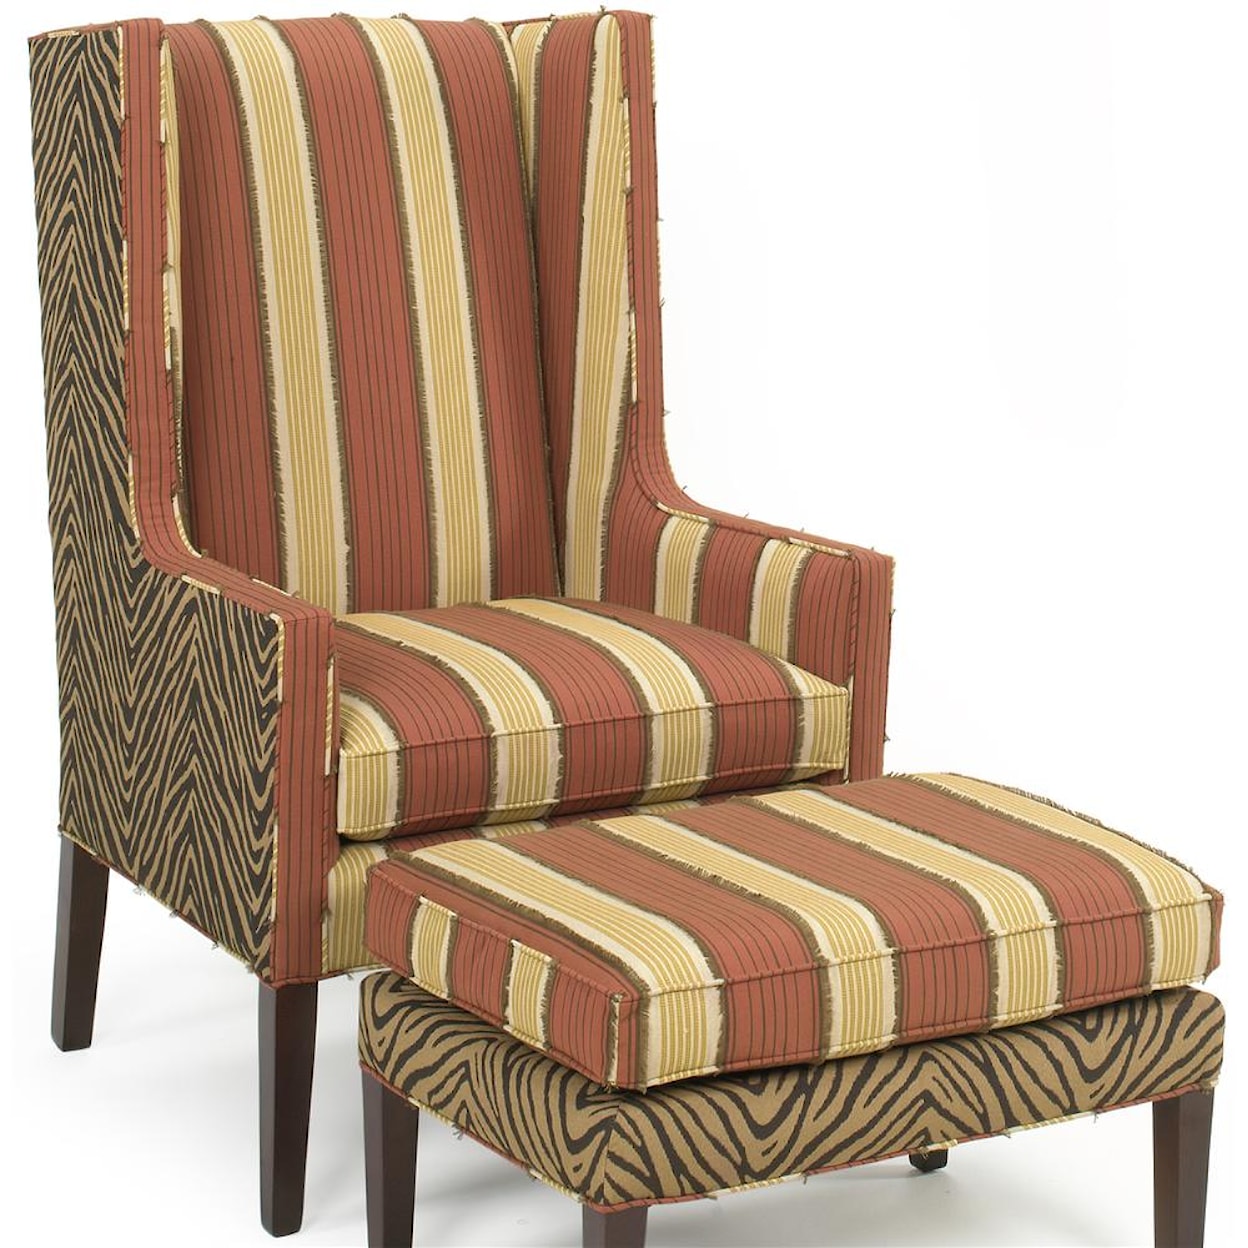 Temple Furniture 6300 Upholstered Chair